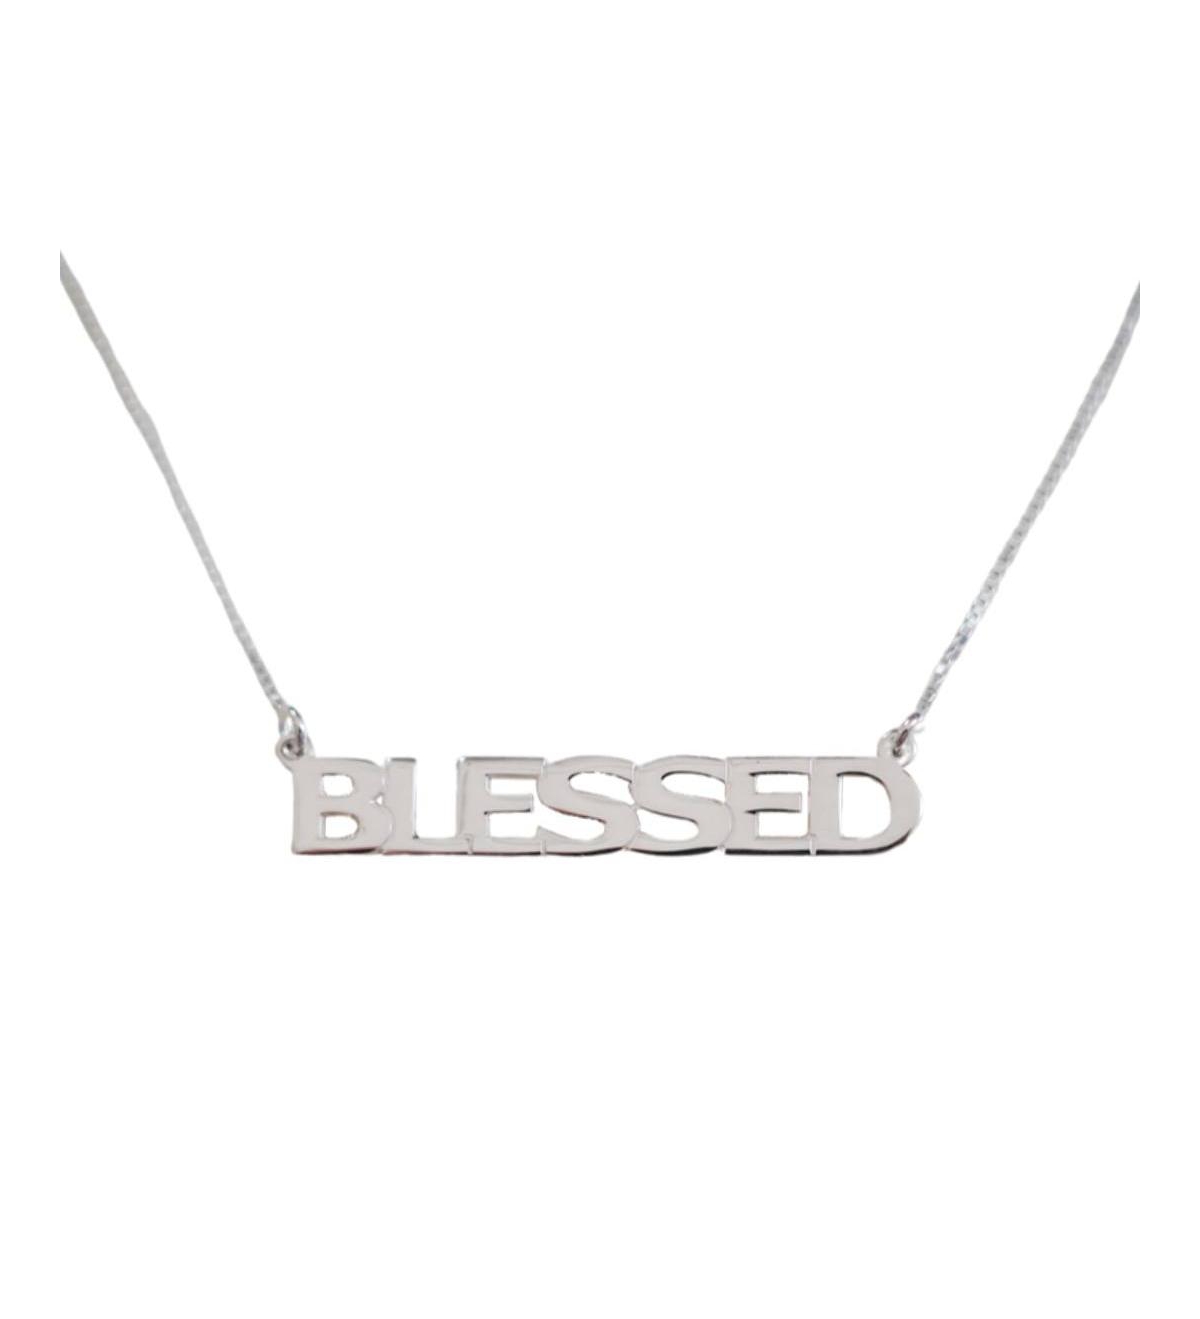 Blessed Necklace - Silver